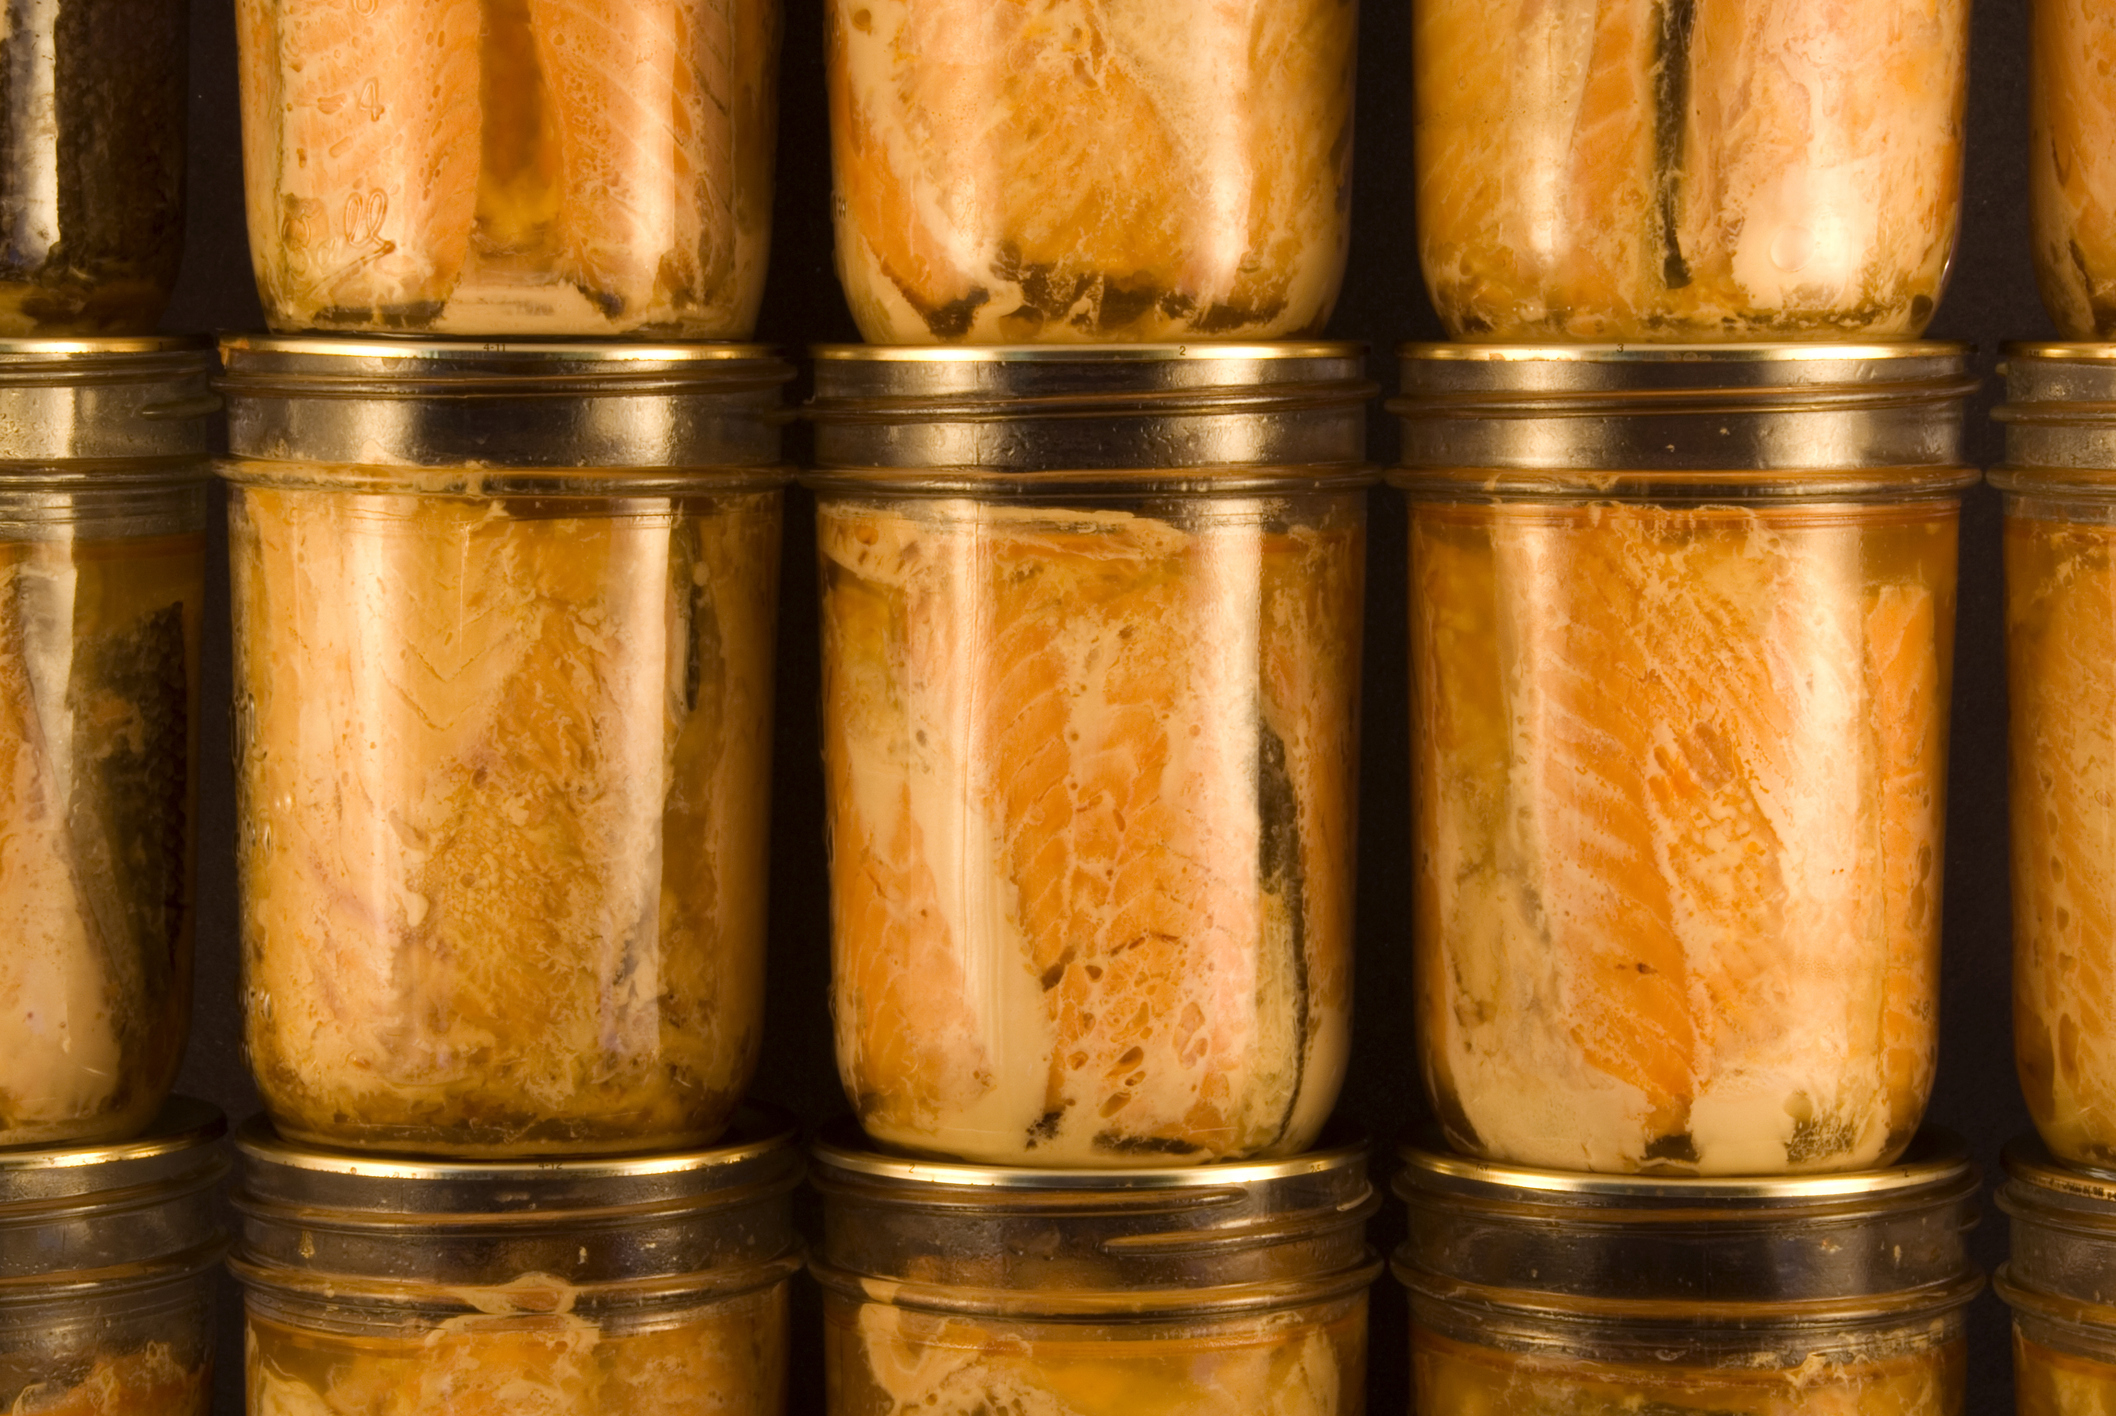 Photo by Ken Klima/iStock
Wild-caught, home-canned salmon, such as this batch, is some of the best eating fish to be found on any dinner table. Workshops in Homer and Soldotna in early June will teach participants a safe, tested method to can fish. 